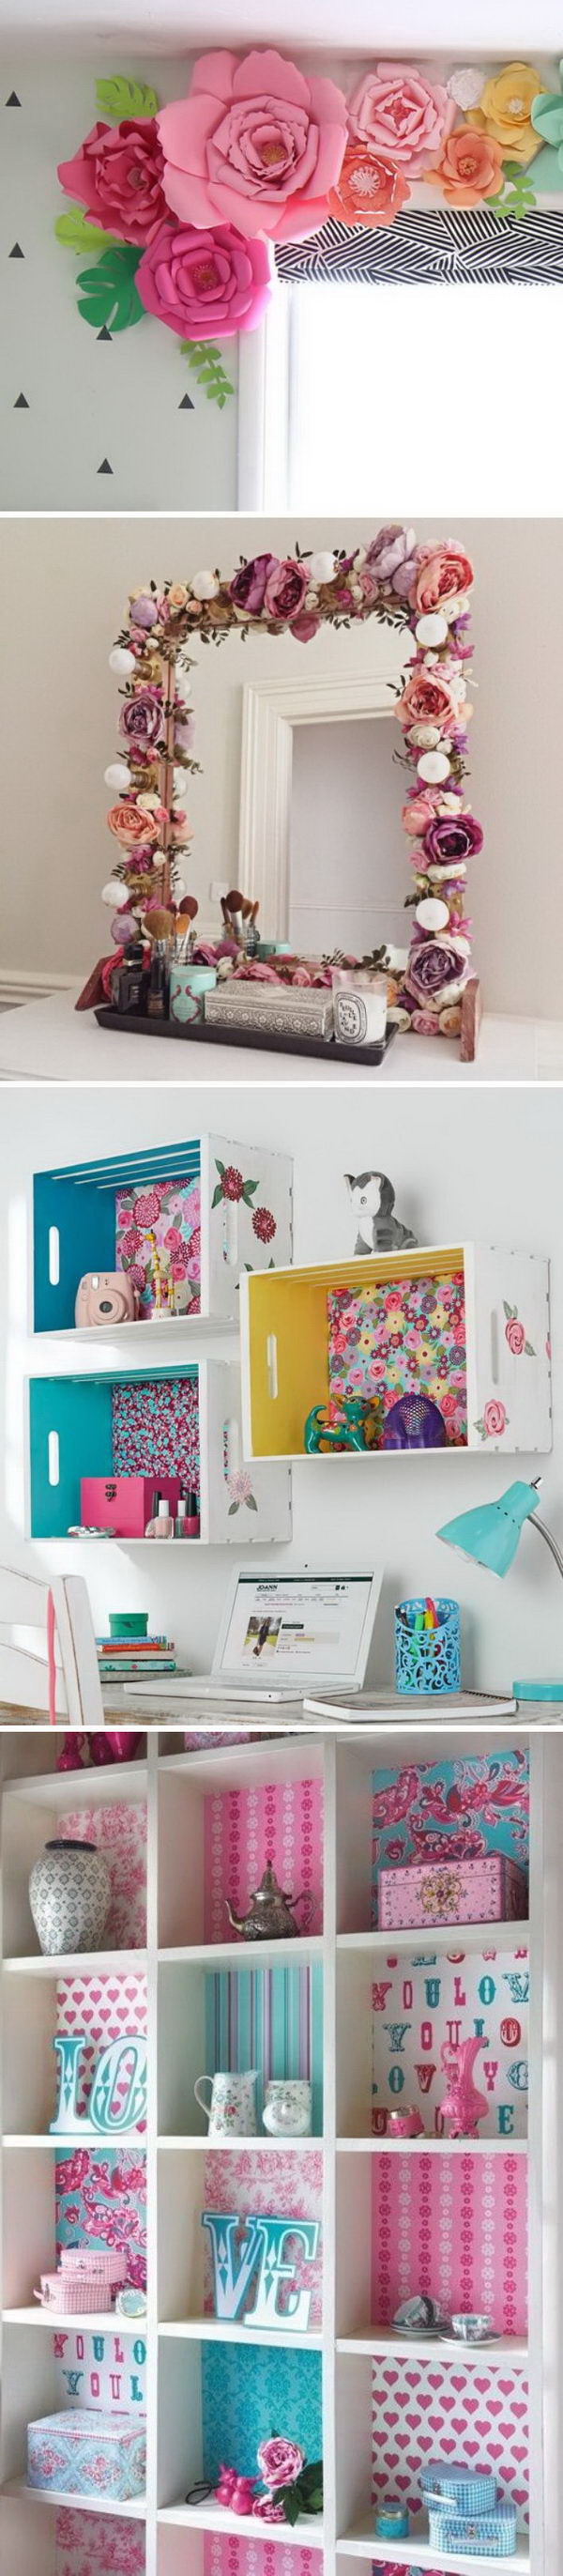 20 Awesome  DIY  Projects To Decorate A Girl s Bedroom  2020